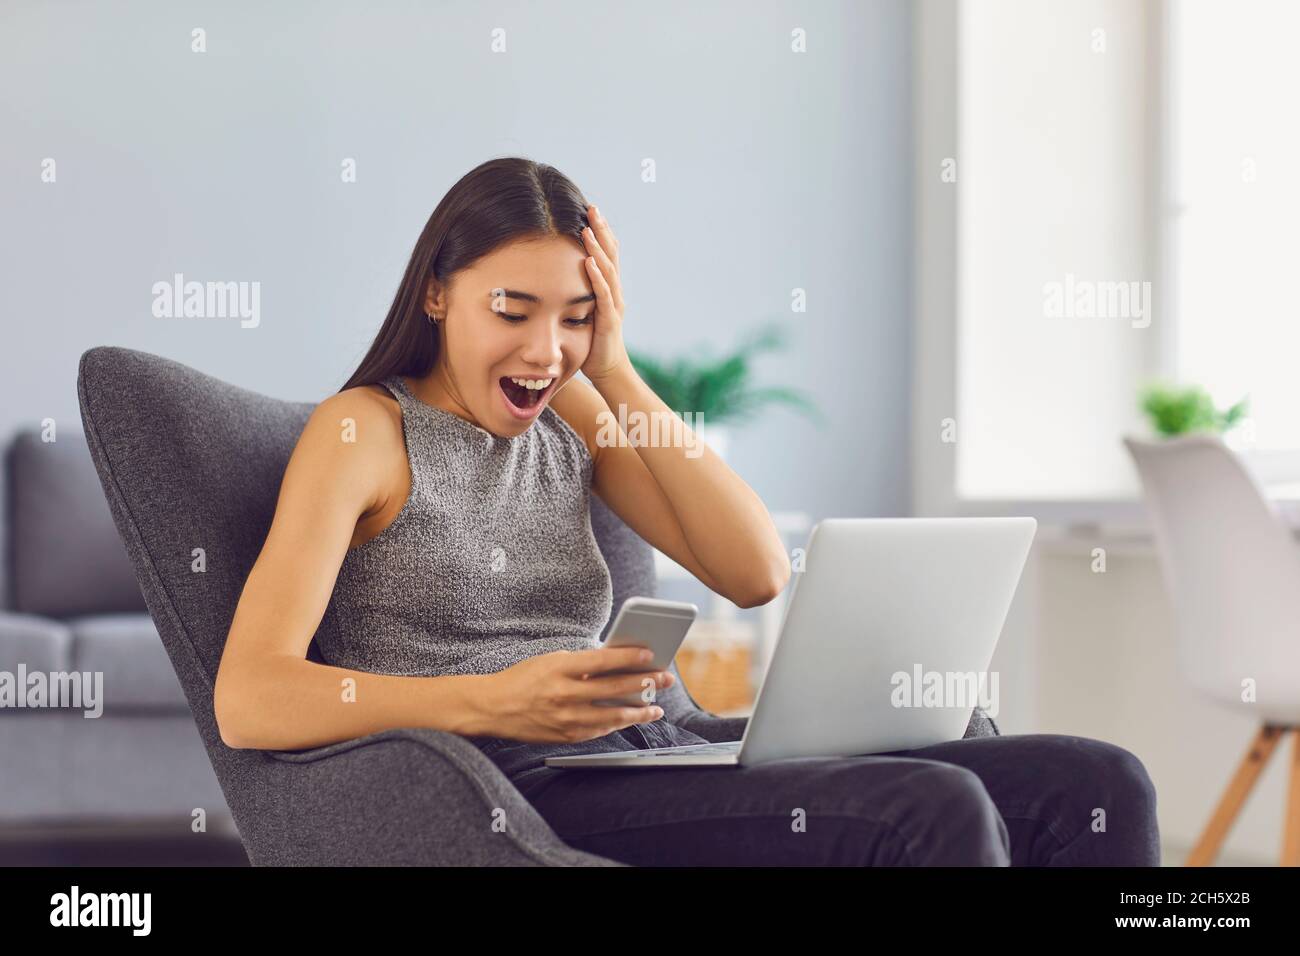 Super happy young girl receiving social media notification sitting in armchair at home Stock Photo